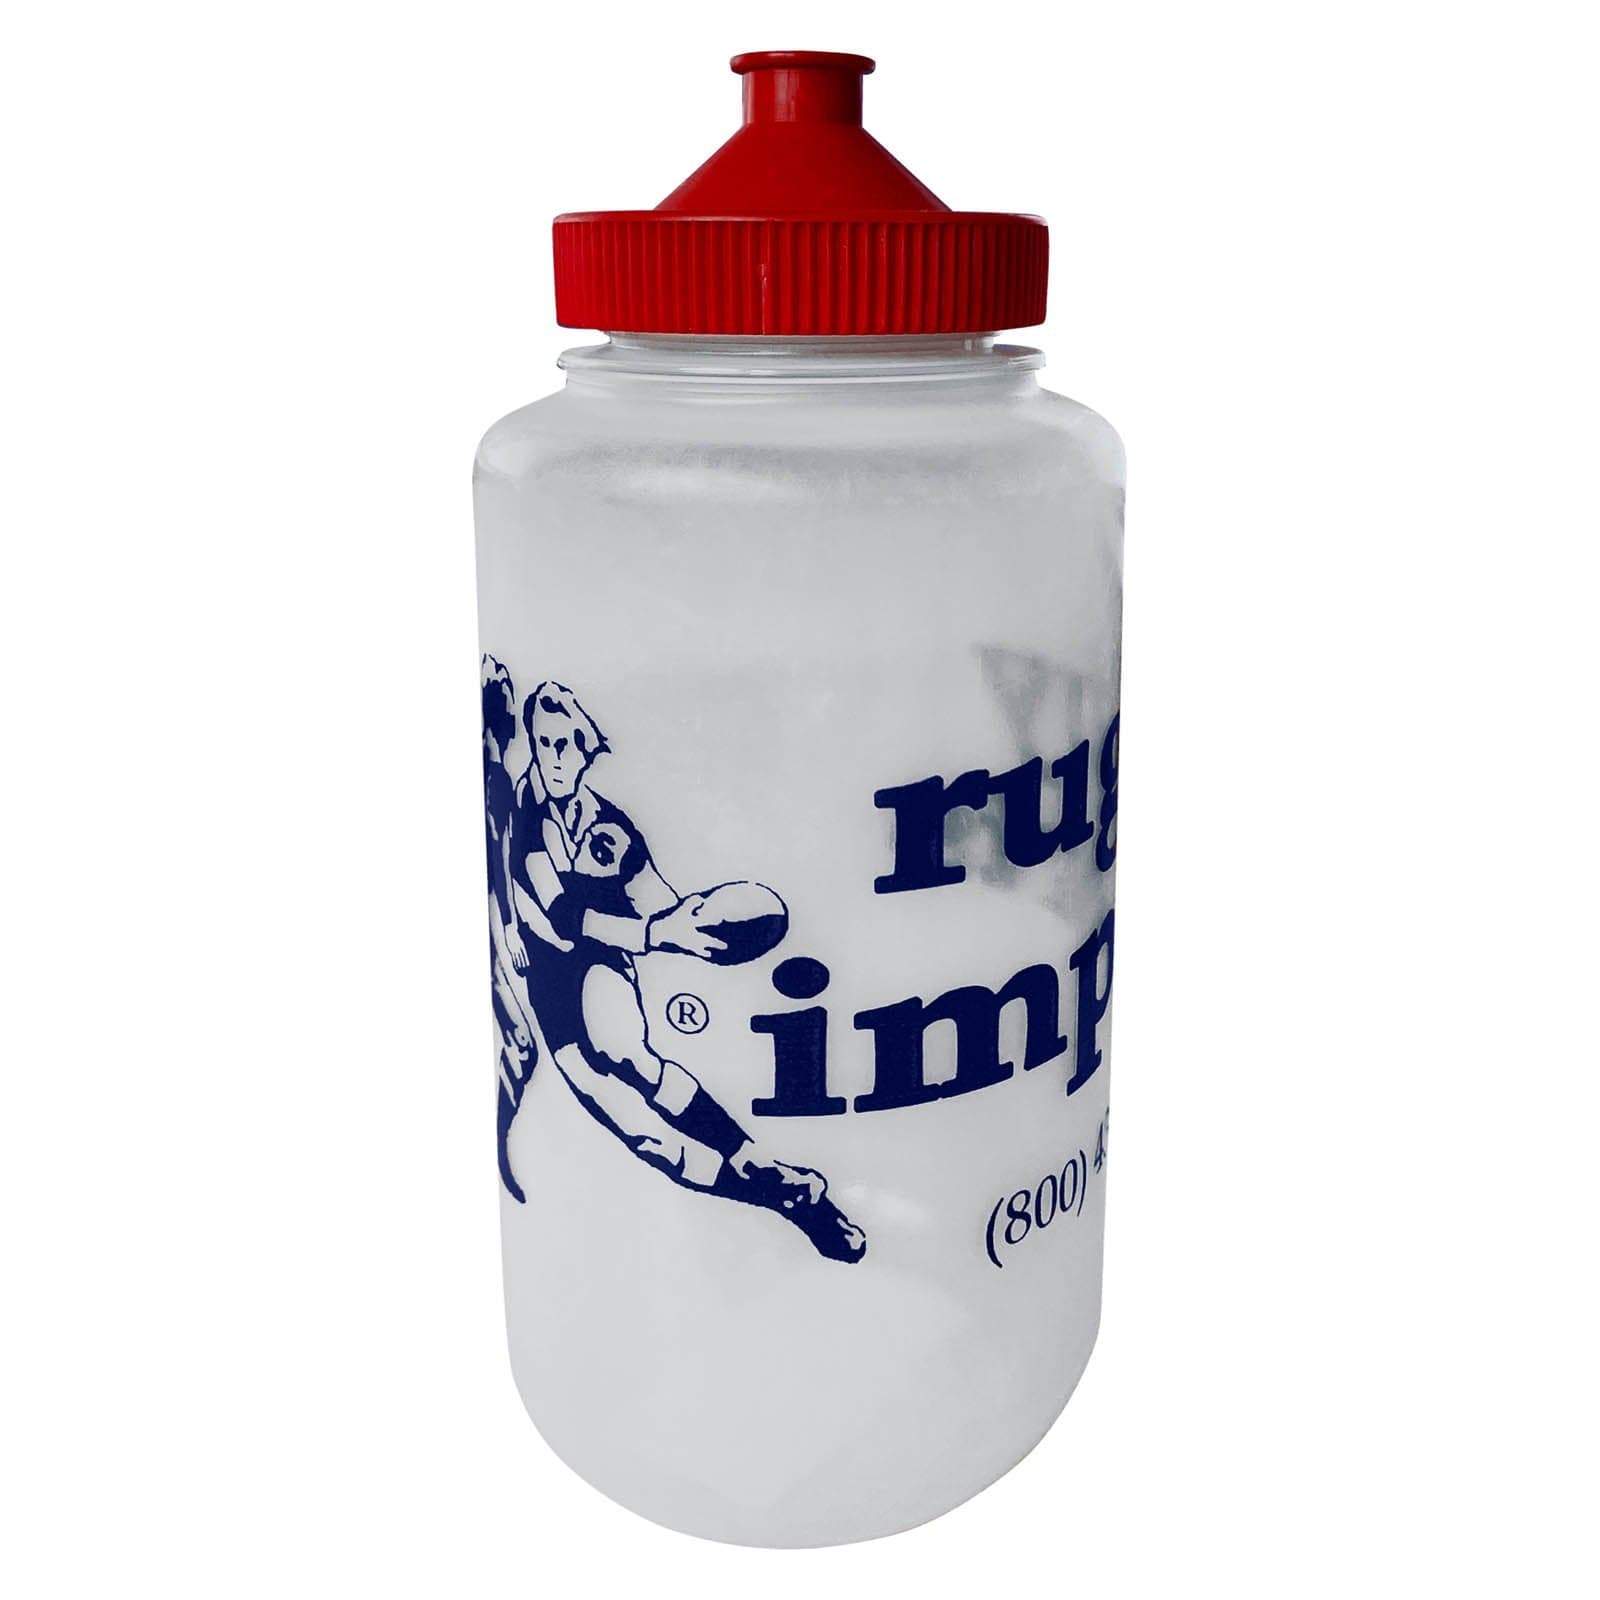 https://cdn.shopify.com/s/files/1/0092/5312/6259/products/rugby-imports-rugby-bundle-rugby-imports-water-bottles-carrier-13087443517555_1600x.jpg?v=1582296556